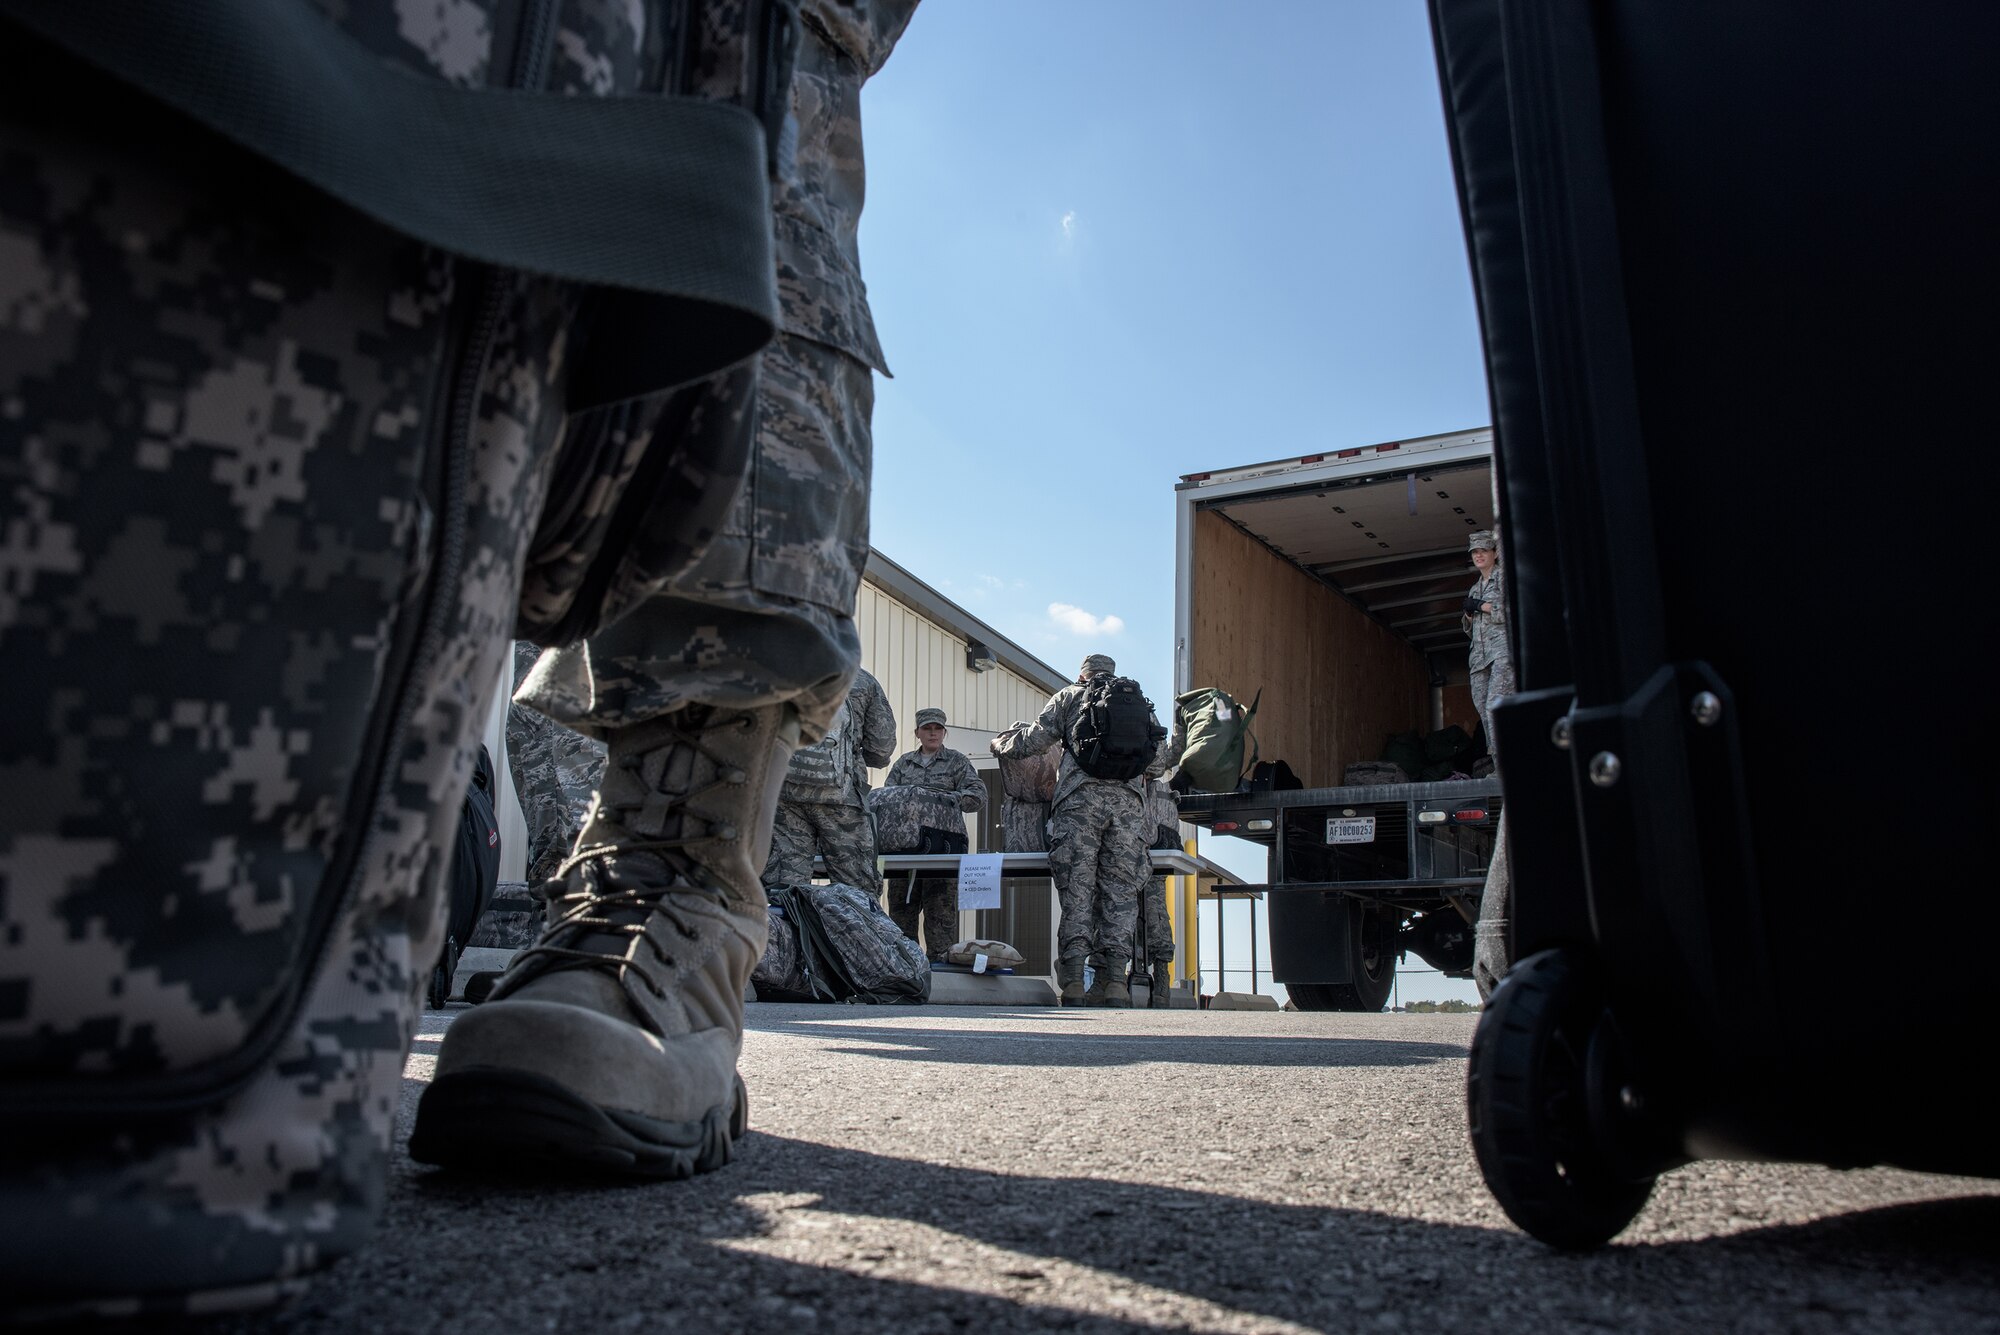 Airmen from the 137th Special Operations Wing, Will Rogers Air National Guard Base, wait for their baggage to be inspected and loaded prior to deploying in Support of Operation Freedom's Sentinel, October 19, 2016. Over 140 Airmen will deploy from WRANGB to nine different locations in Southwest Asia, the first major deployment for the 137 SOW as a special operations wing. (U.S. Air National Guard photo by Tech. Sgt. Caroline Essex)